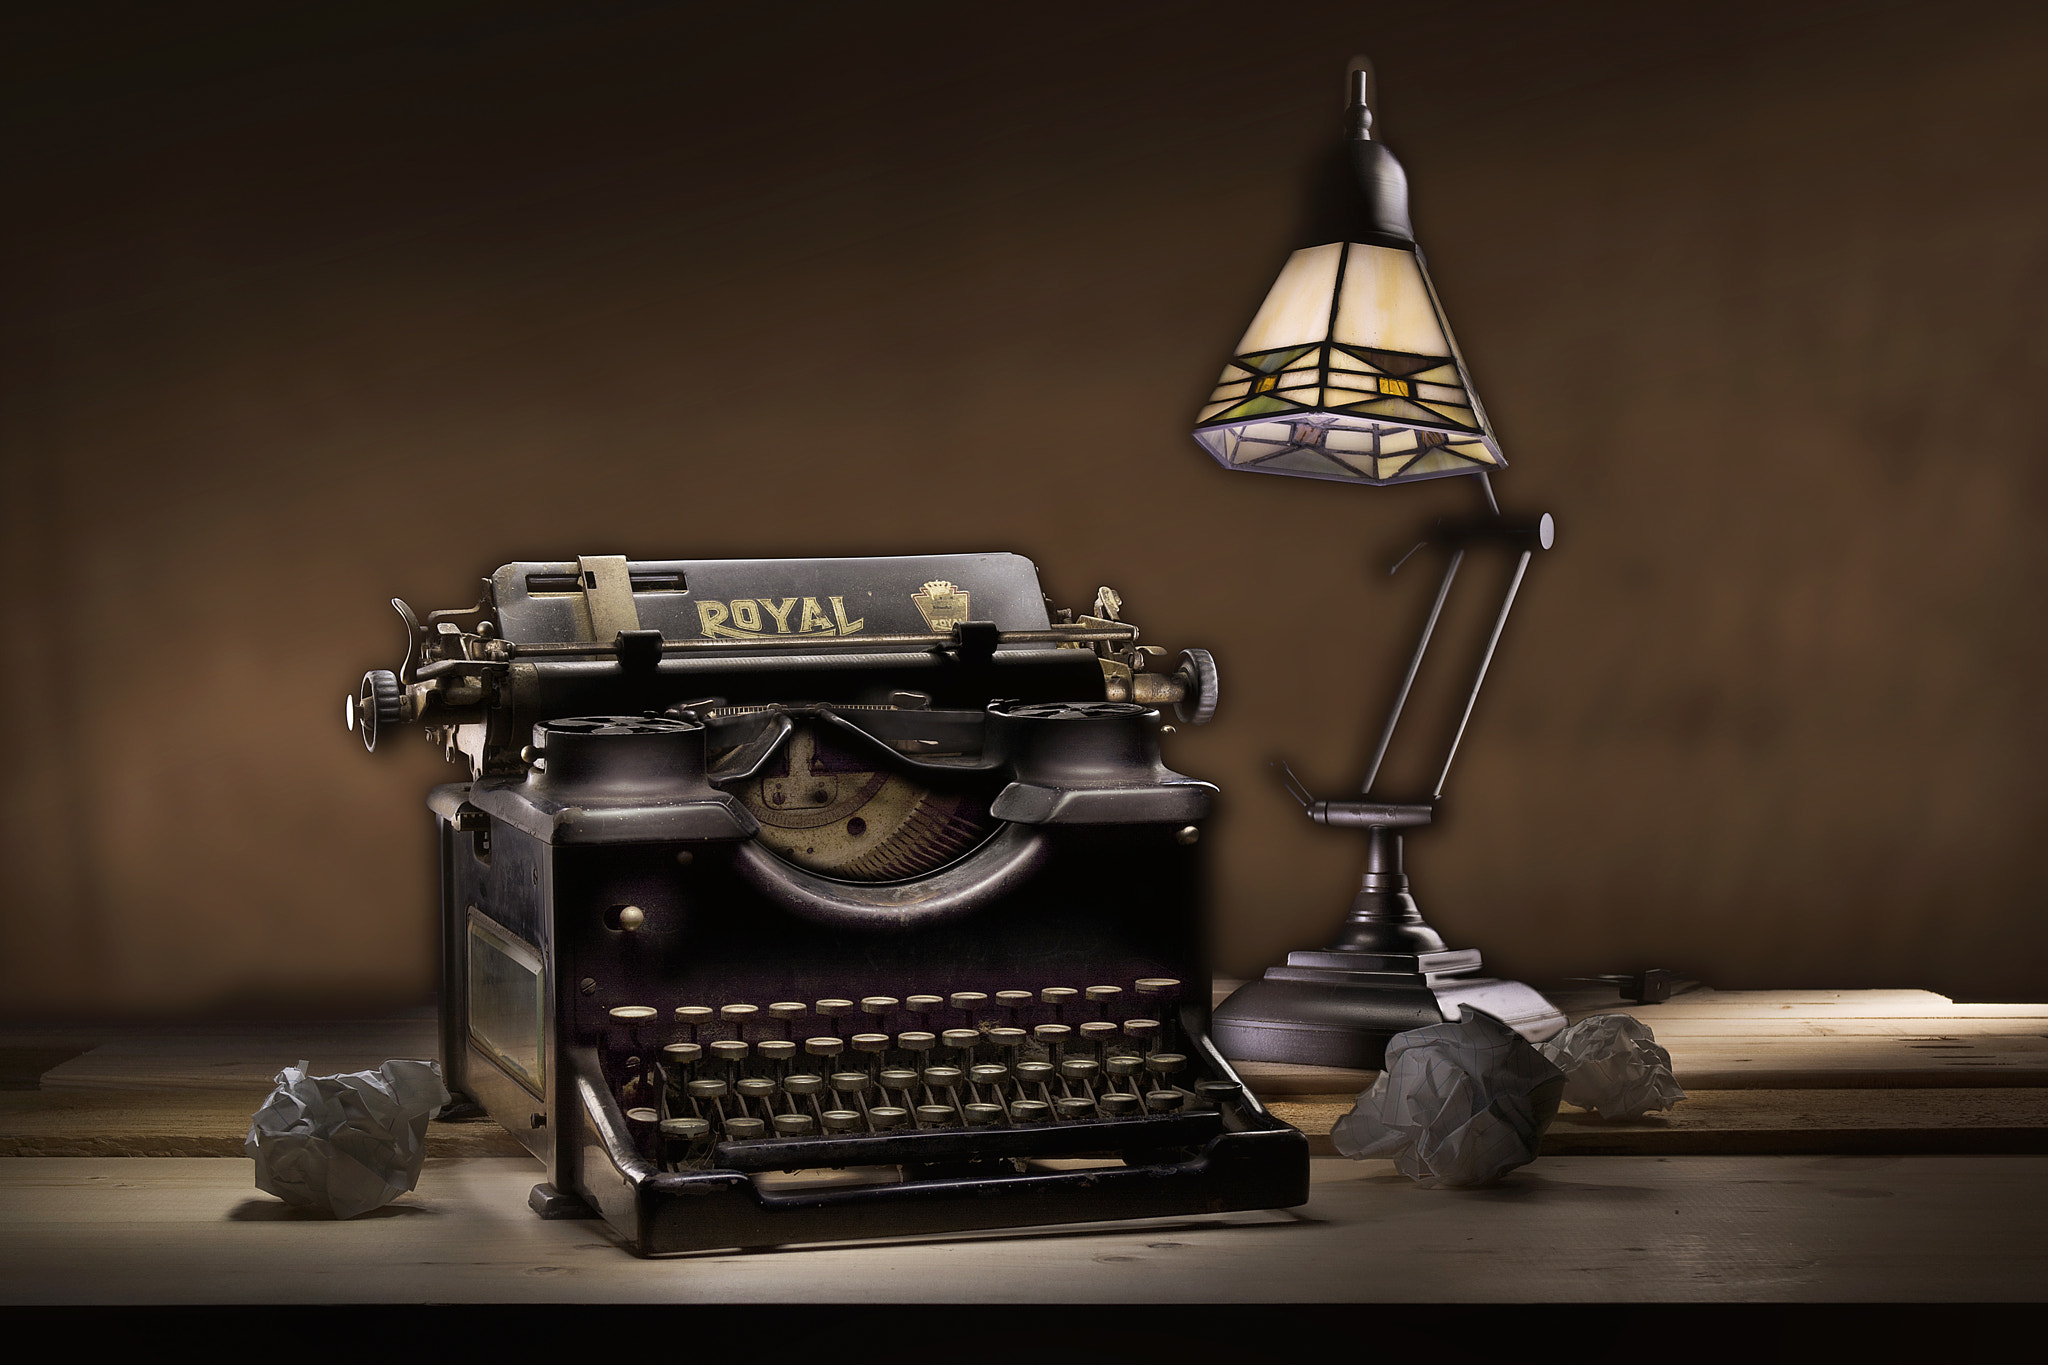 Nikon D7100 sample photo. Old typewriter and lamp in a dimly lit desk photography